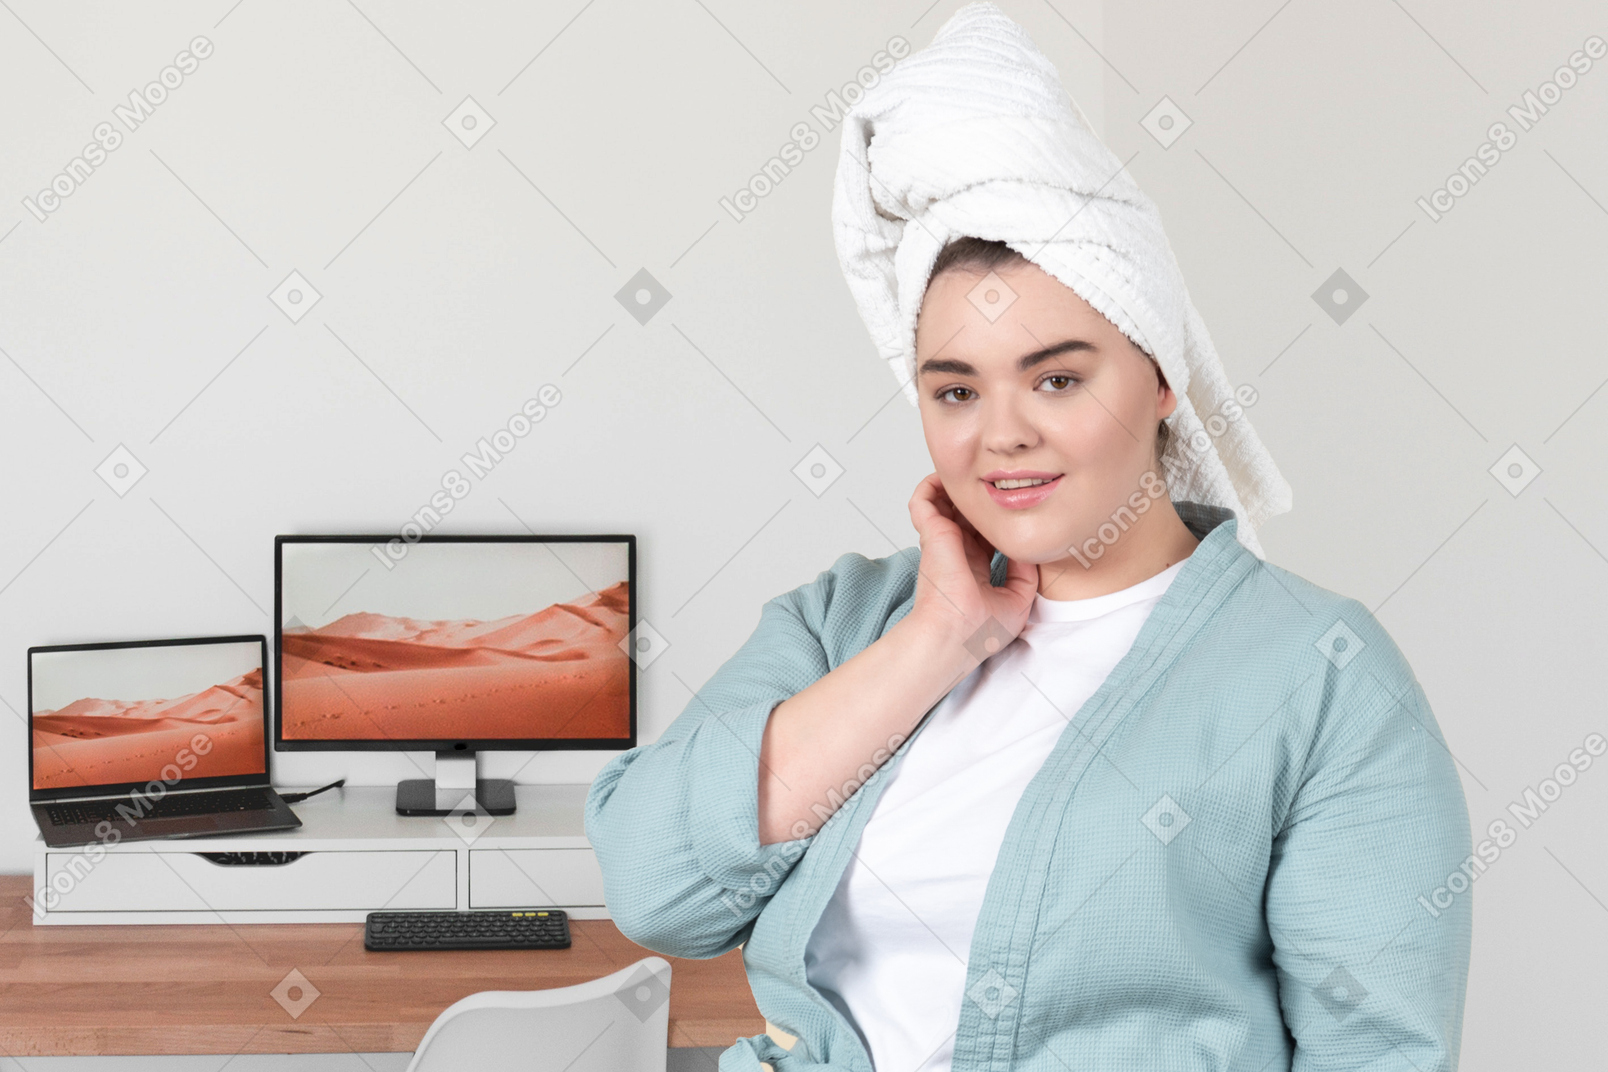 A woman with a towel on her head standing in front of a computer